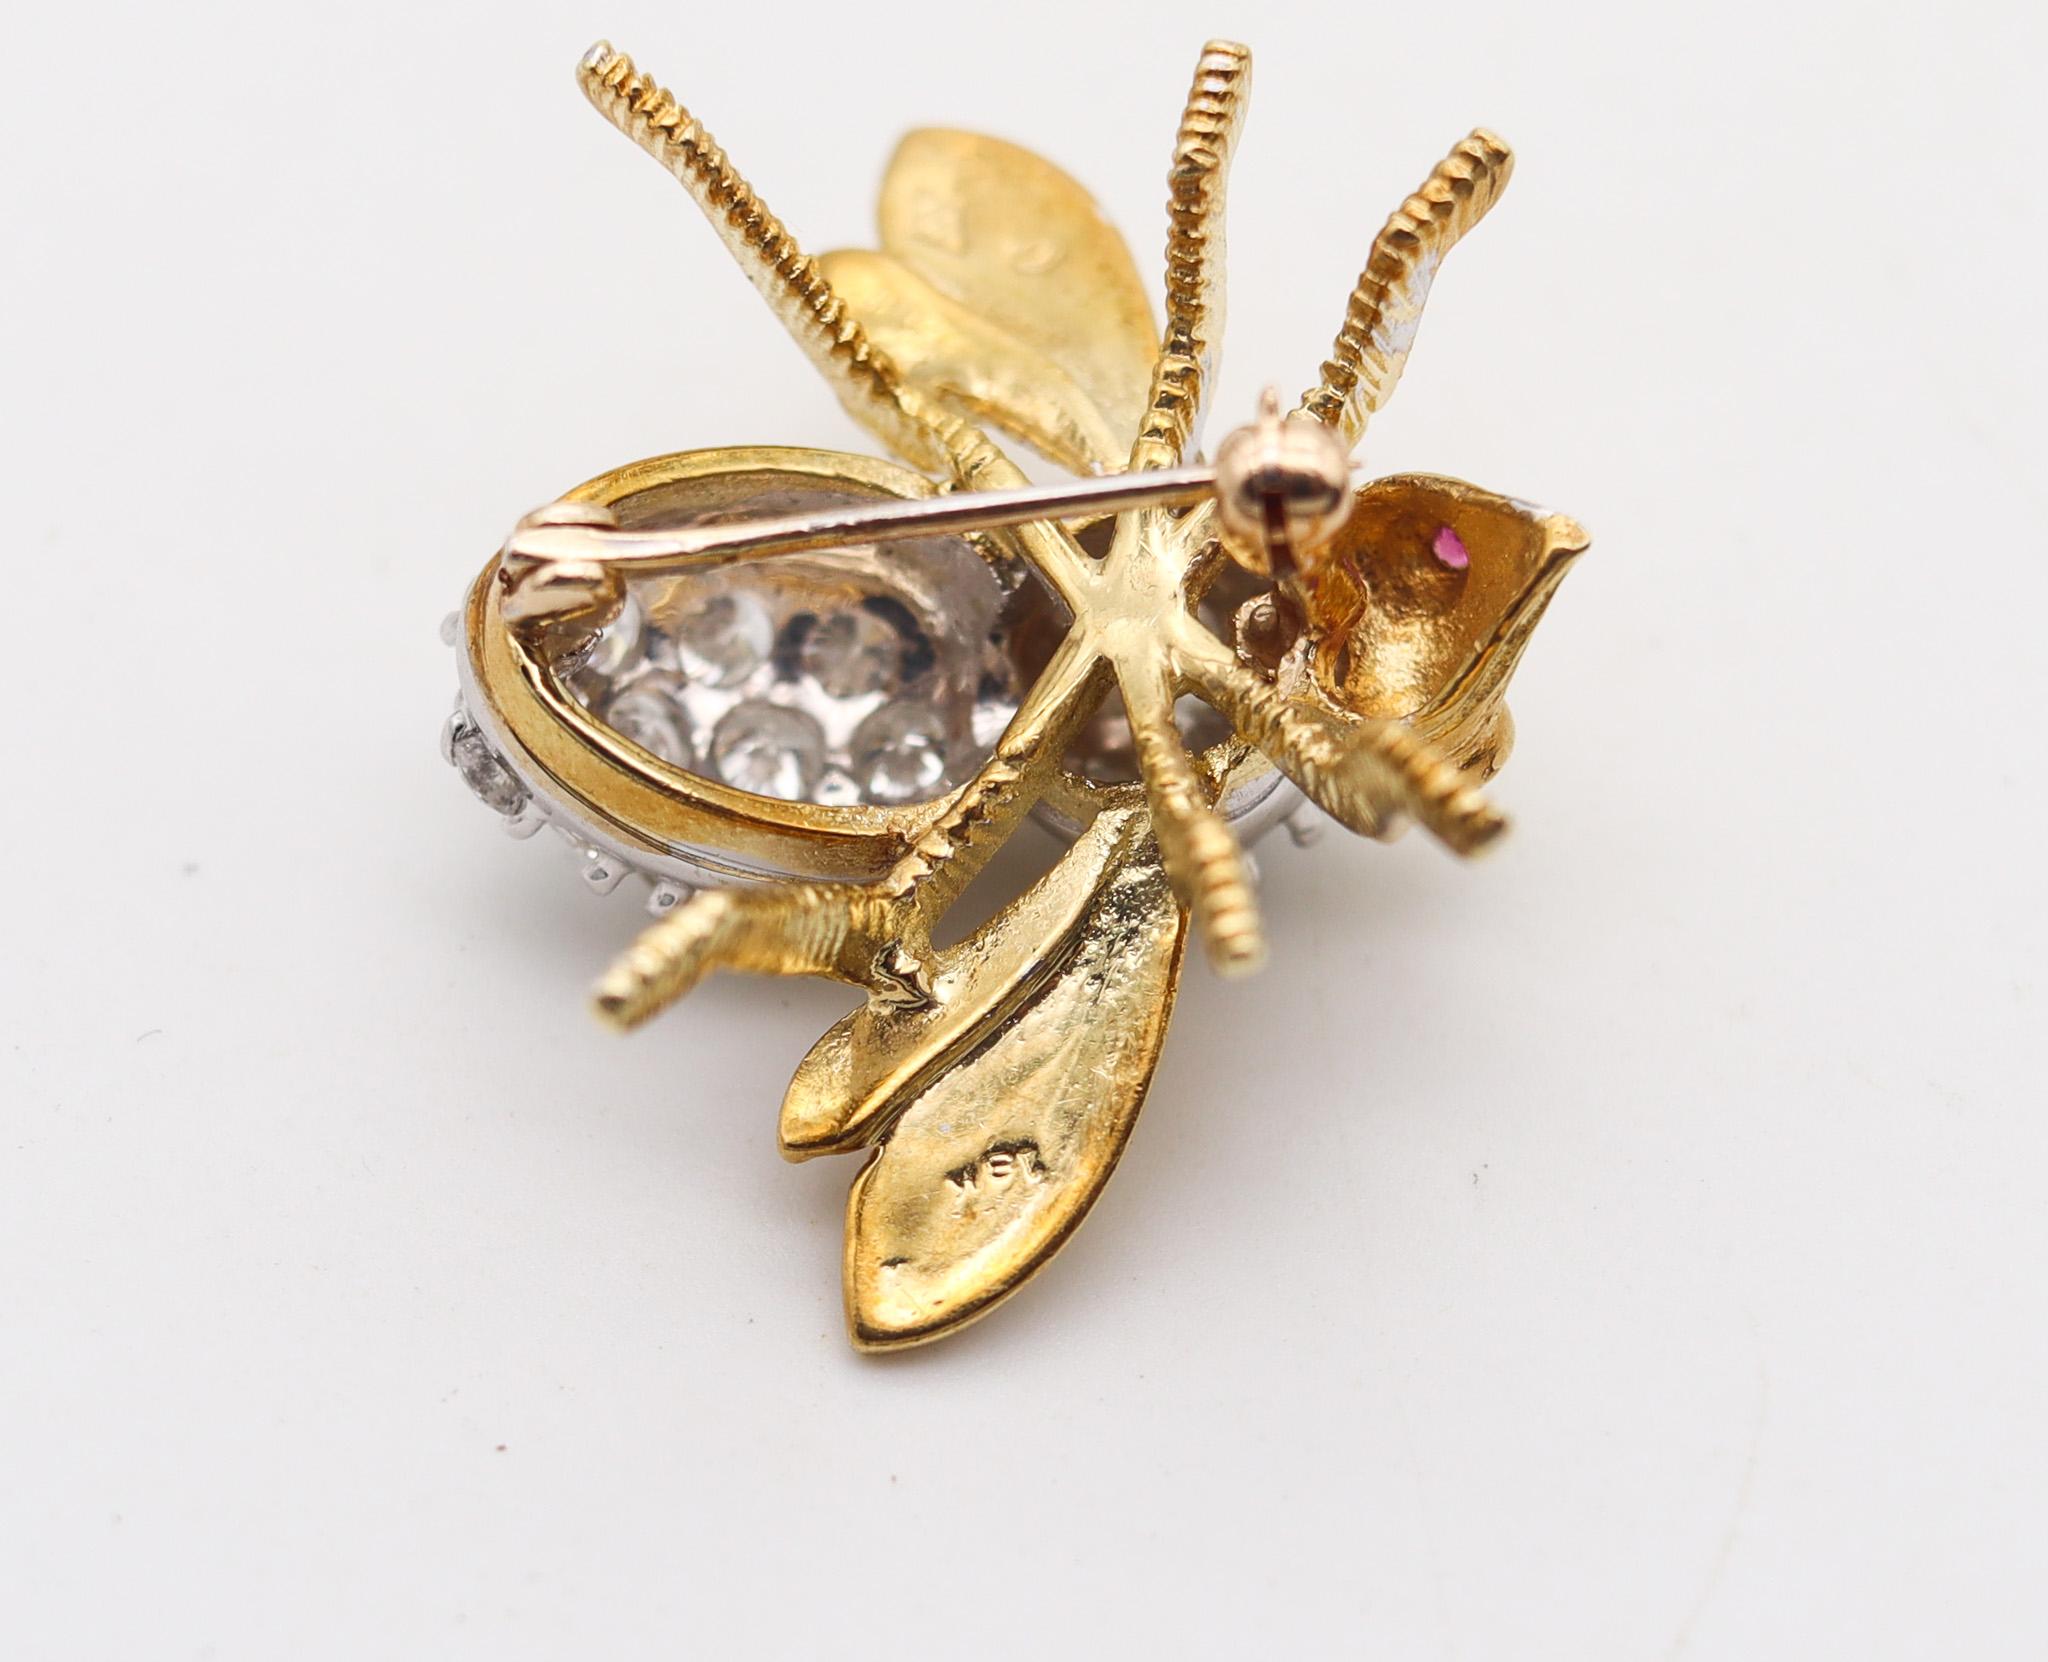 Herbert Rosenthal 1960 Bee Brooch in 18kt Yellow Gold 2.34 Ctw Diamonds & Rubies In Excellent Condition For Sale In Miami, FL